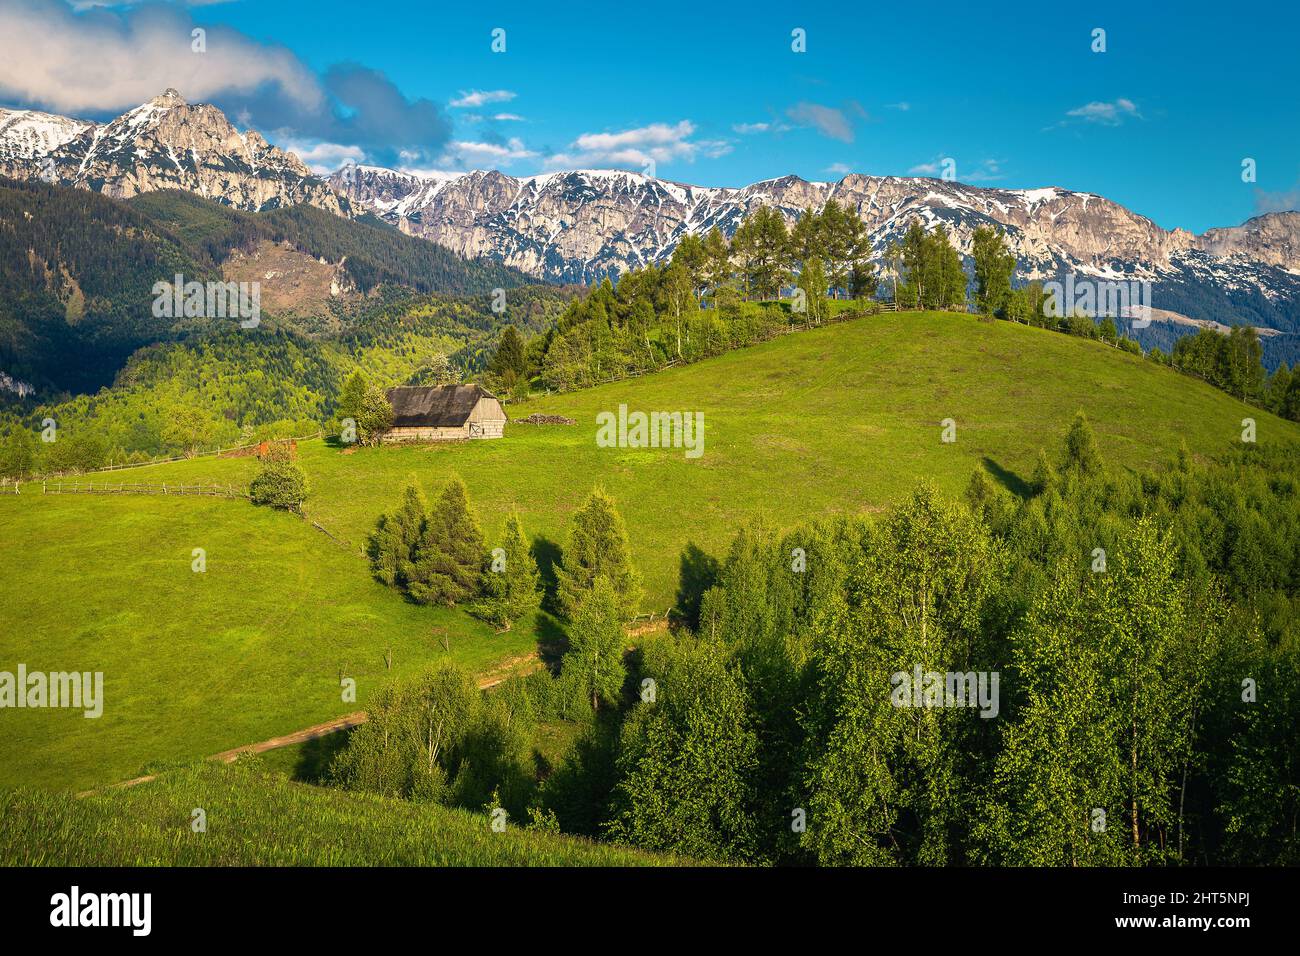 Beautiful rural landscape, green fields and forests with snowy mountains in background, Bucegi mountains, Moieciu de Sus, Romania, Europe Stock Photo